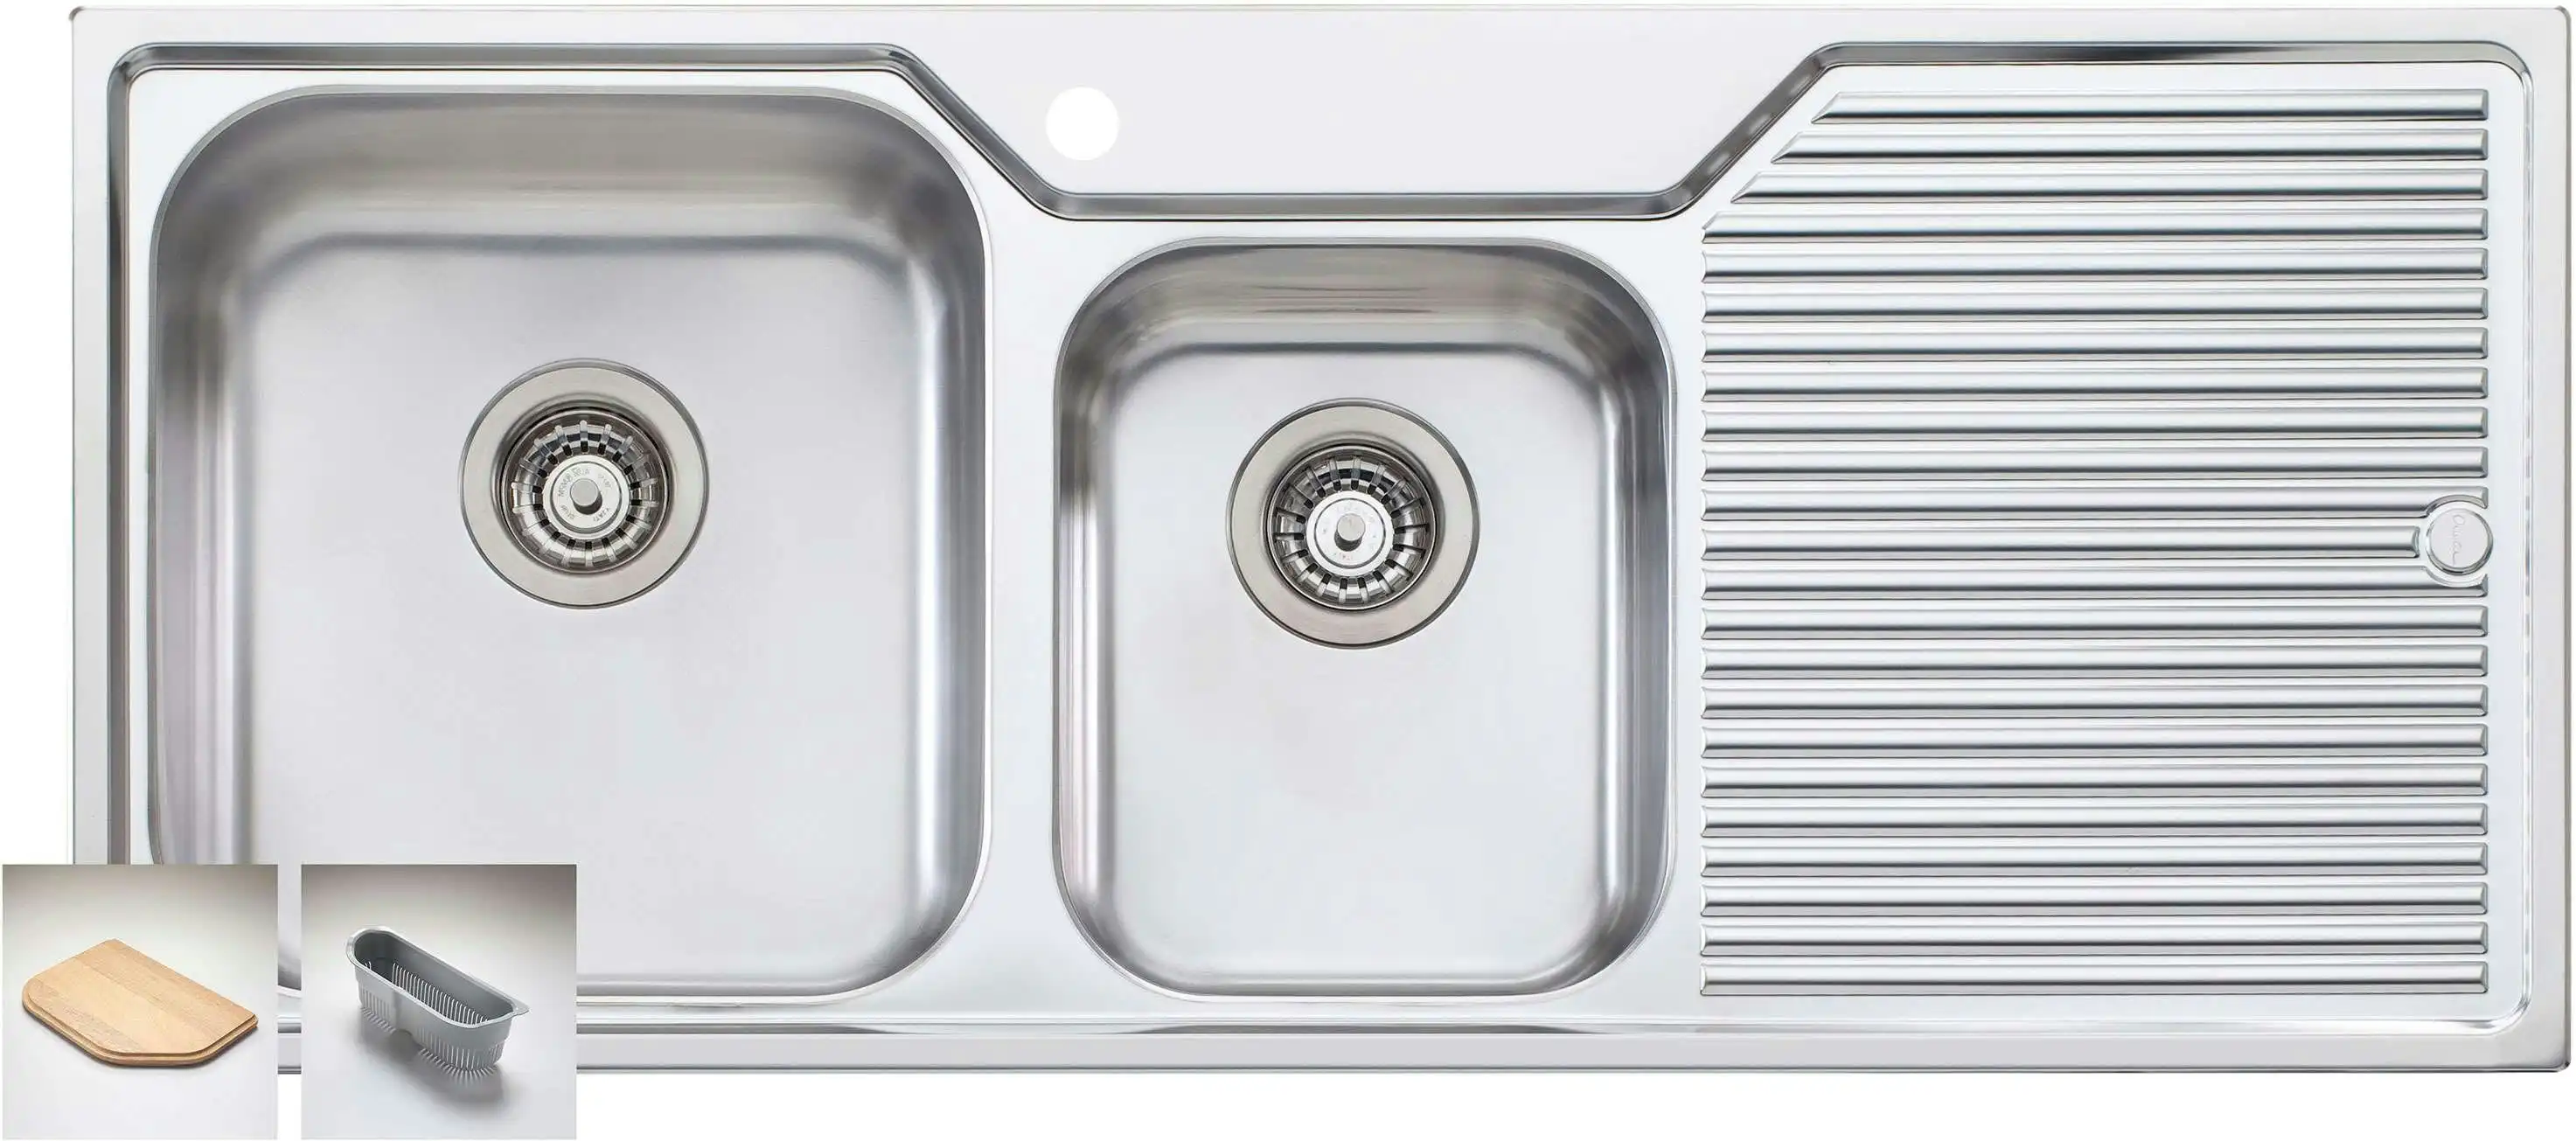 Oliveri Nu-petite 1 & 3/4 Double Left Hand Bowl Inset Sink With Drainer NP611